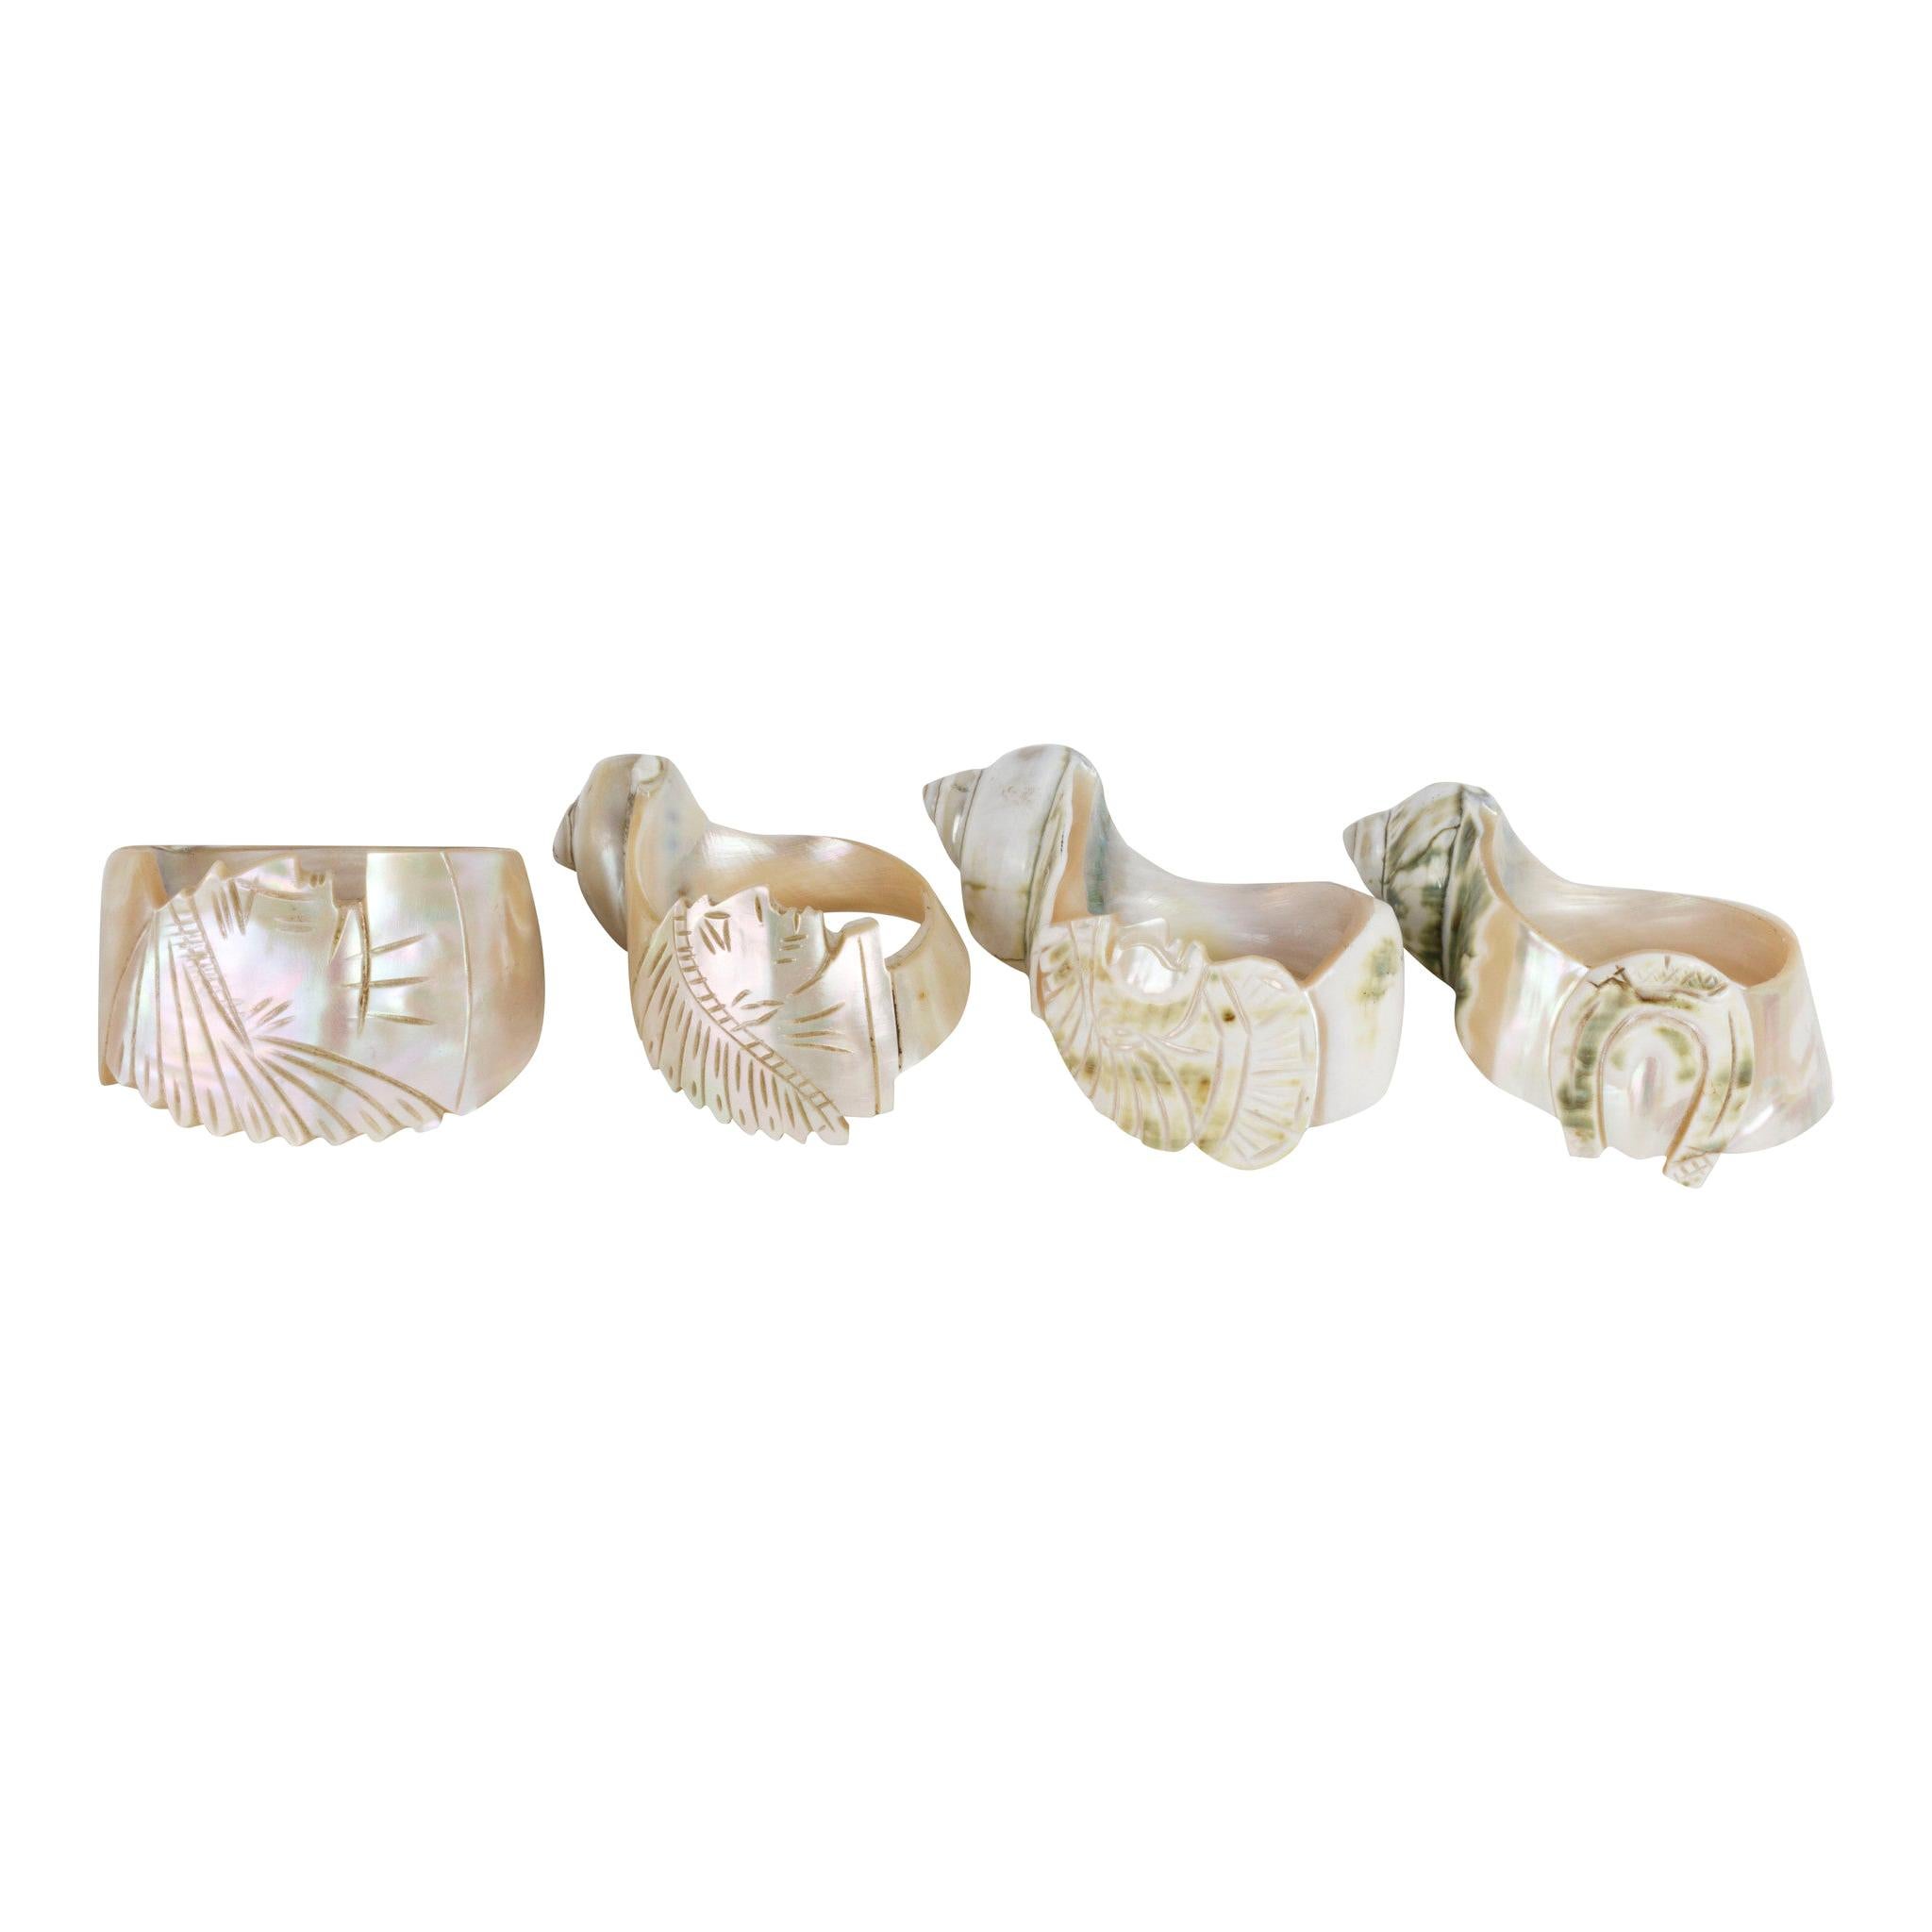 Collection of 4 1890s Carved Conch Napkin Rings